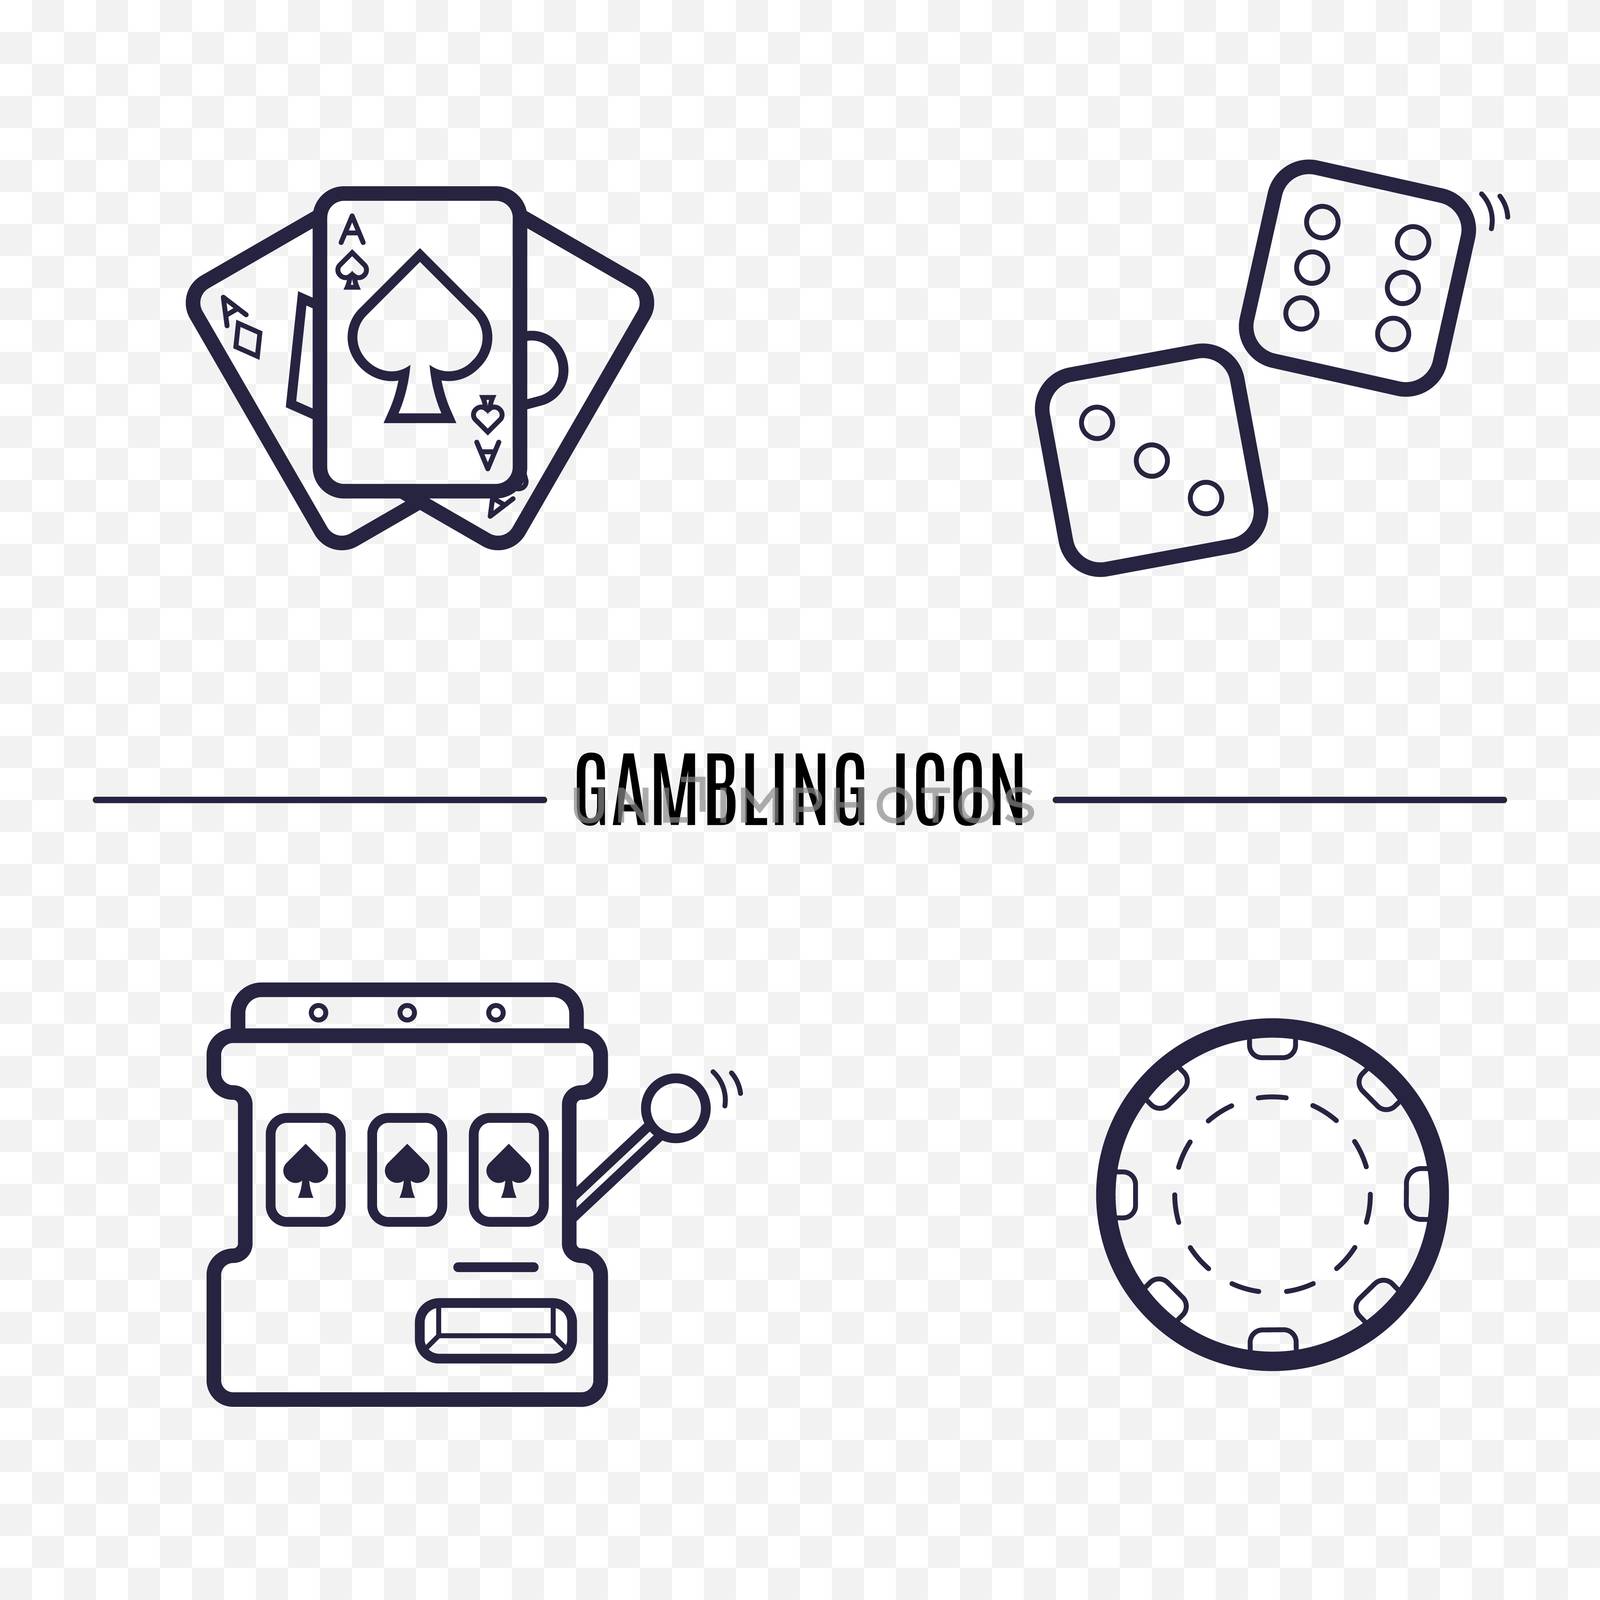 Gambling simple line icon. Card, dice, casino chip, slot mashine thin linear signs. Outline casino game simple concept for websites, infographic, mobile applications. by Elena_Garder